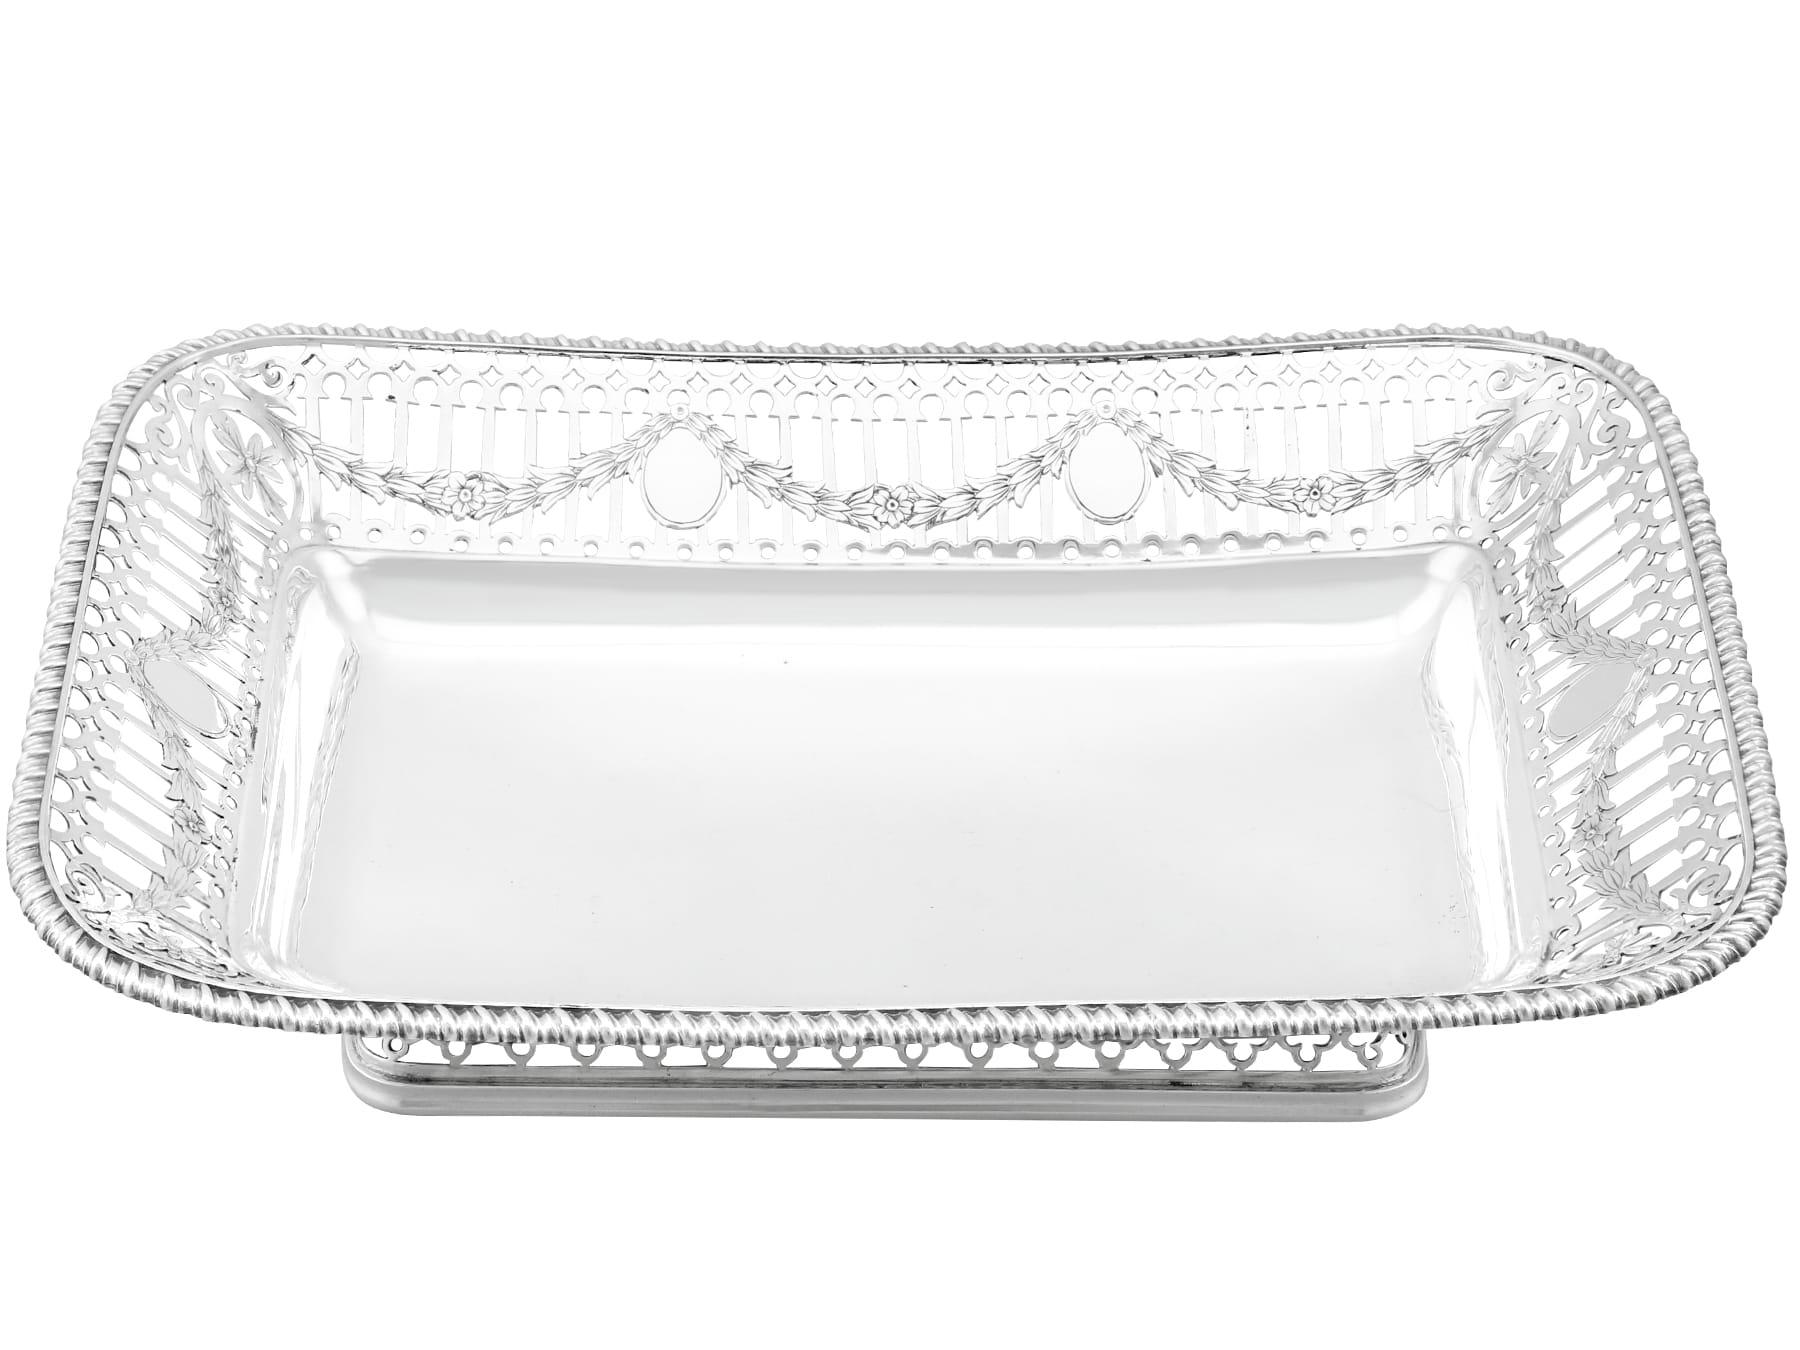 An exceptional, fine and impressive antique Edwardian English sterling silver bread/fruit dish; an addition to our dining silverware collection

This exceptional antique Edwardian sterling silver bread/fruit dish has a rounded rectangular